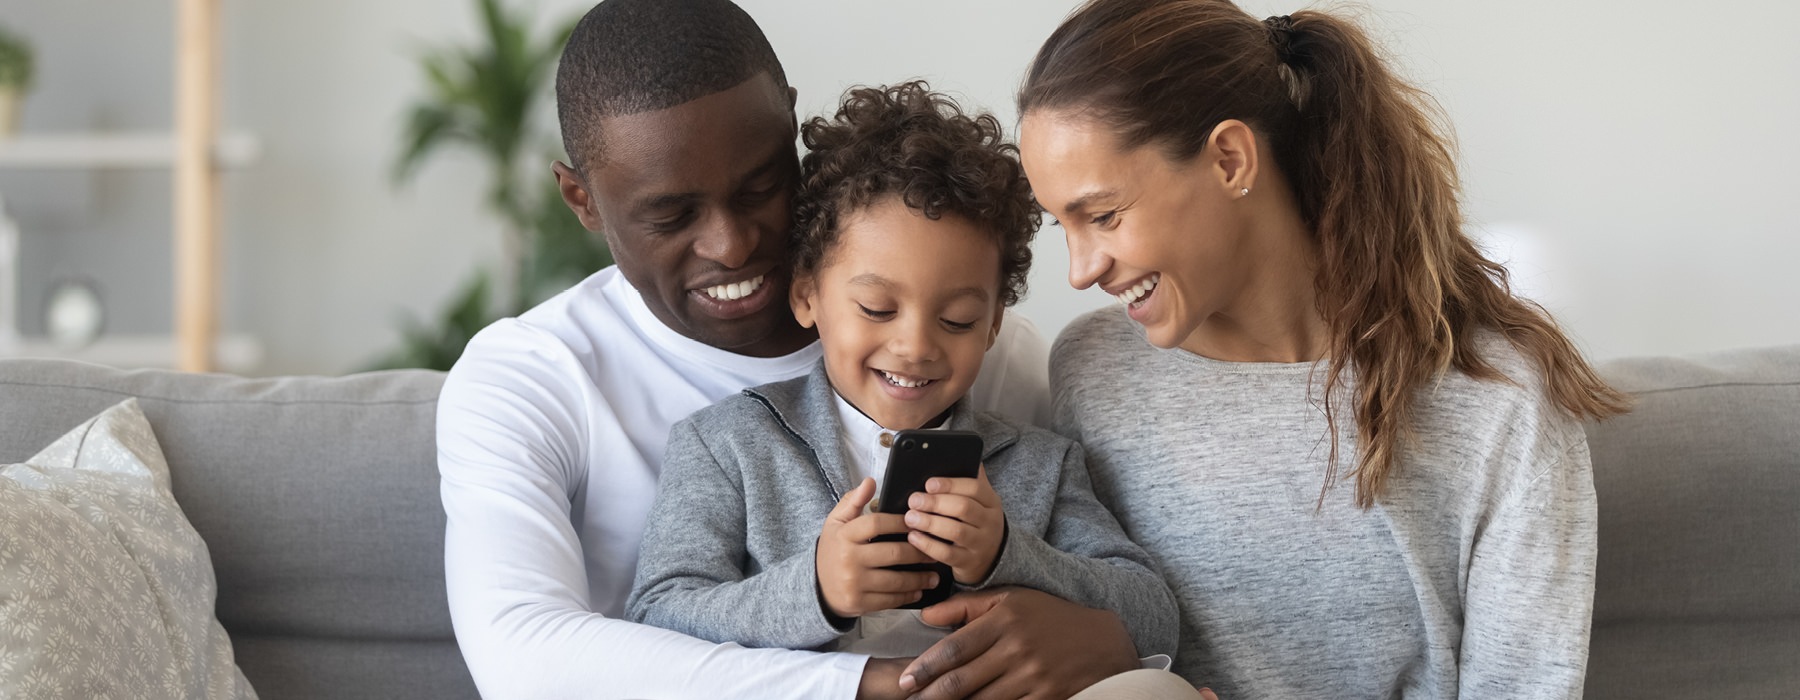 Man, woman and child sitting on couch looking at phone